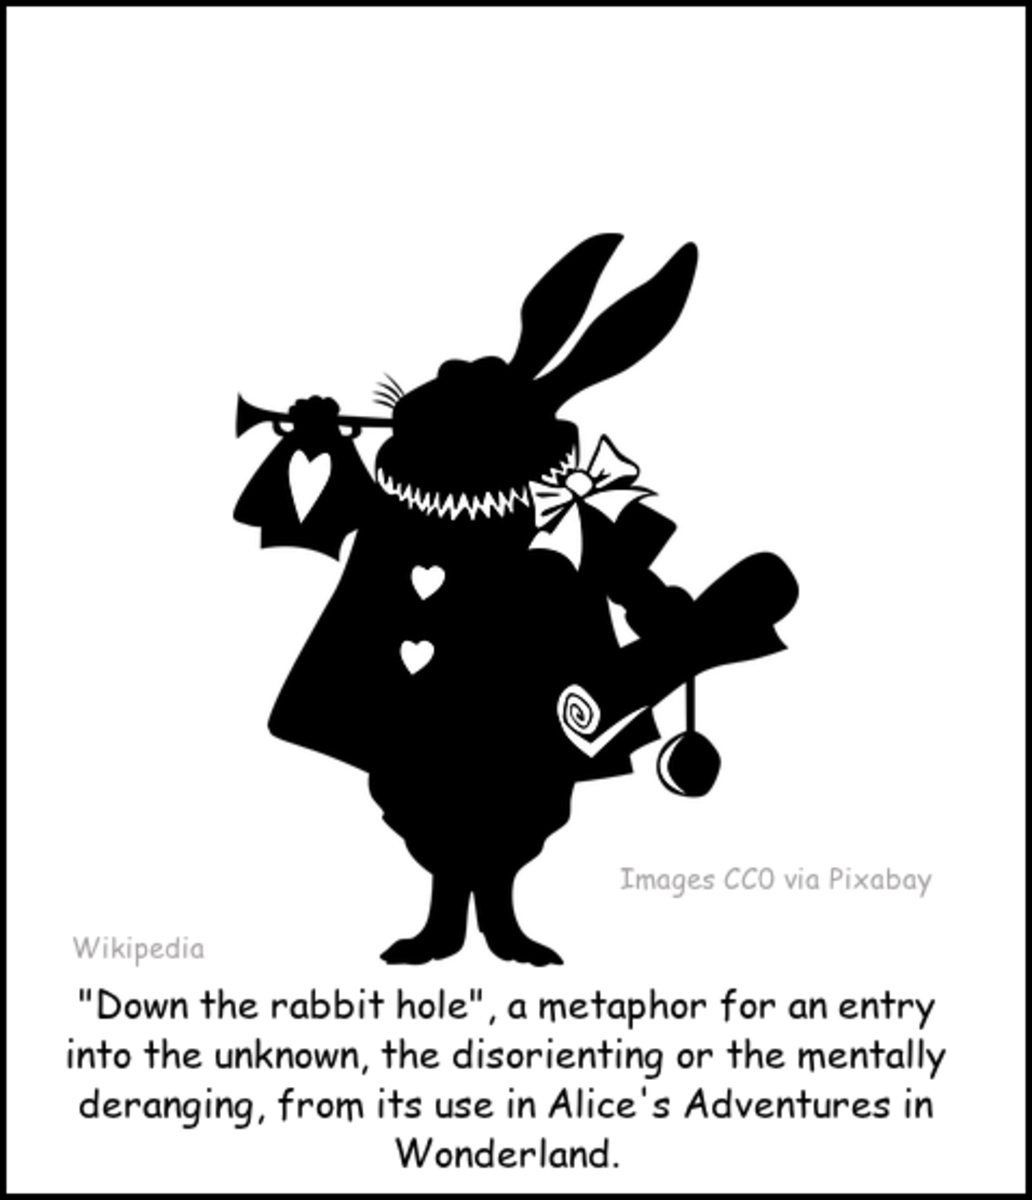 "Down the rabbit hole," a metaphor for an entry into the unknown, the disorienting or mentally deranging, from its use in Alice's Adventures in Wonderland.  - Wikipedia